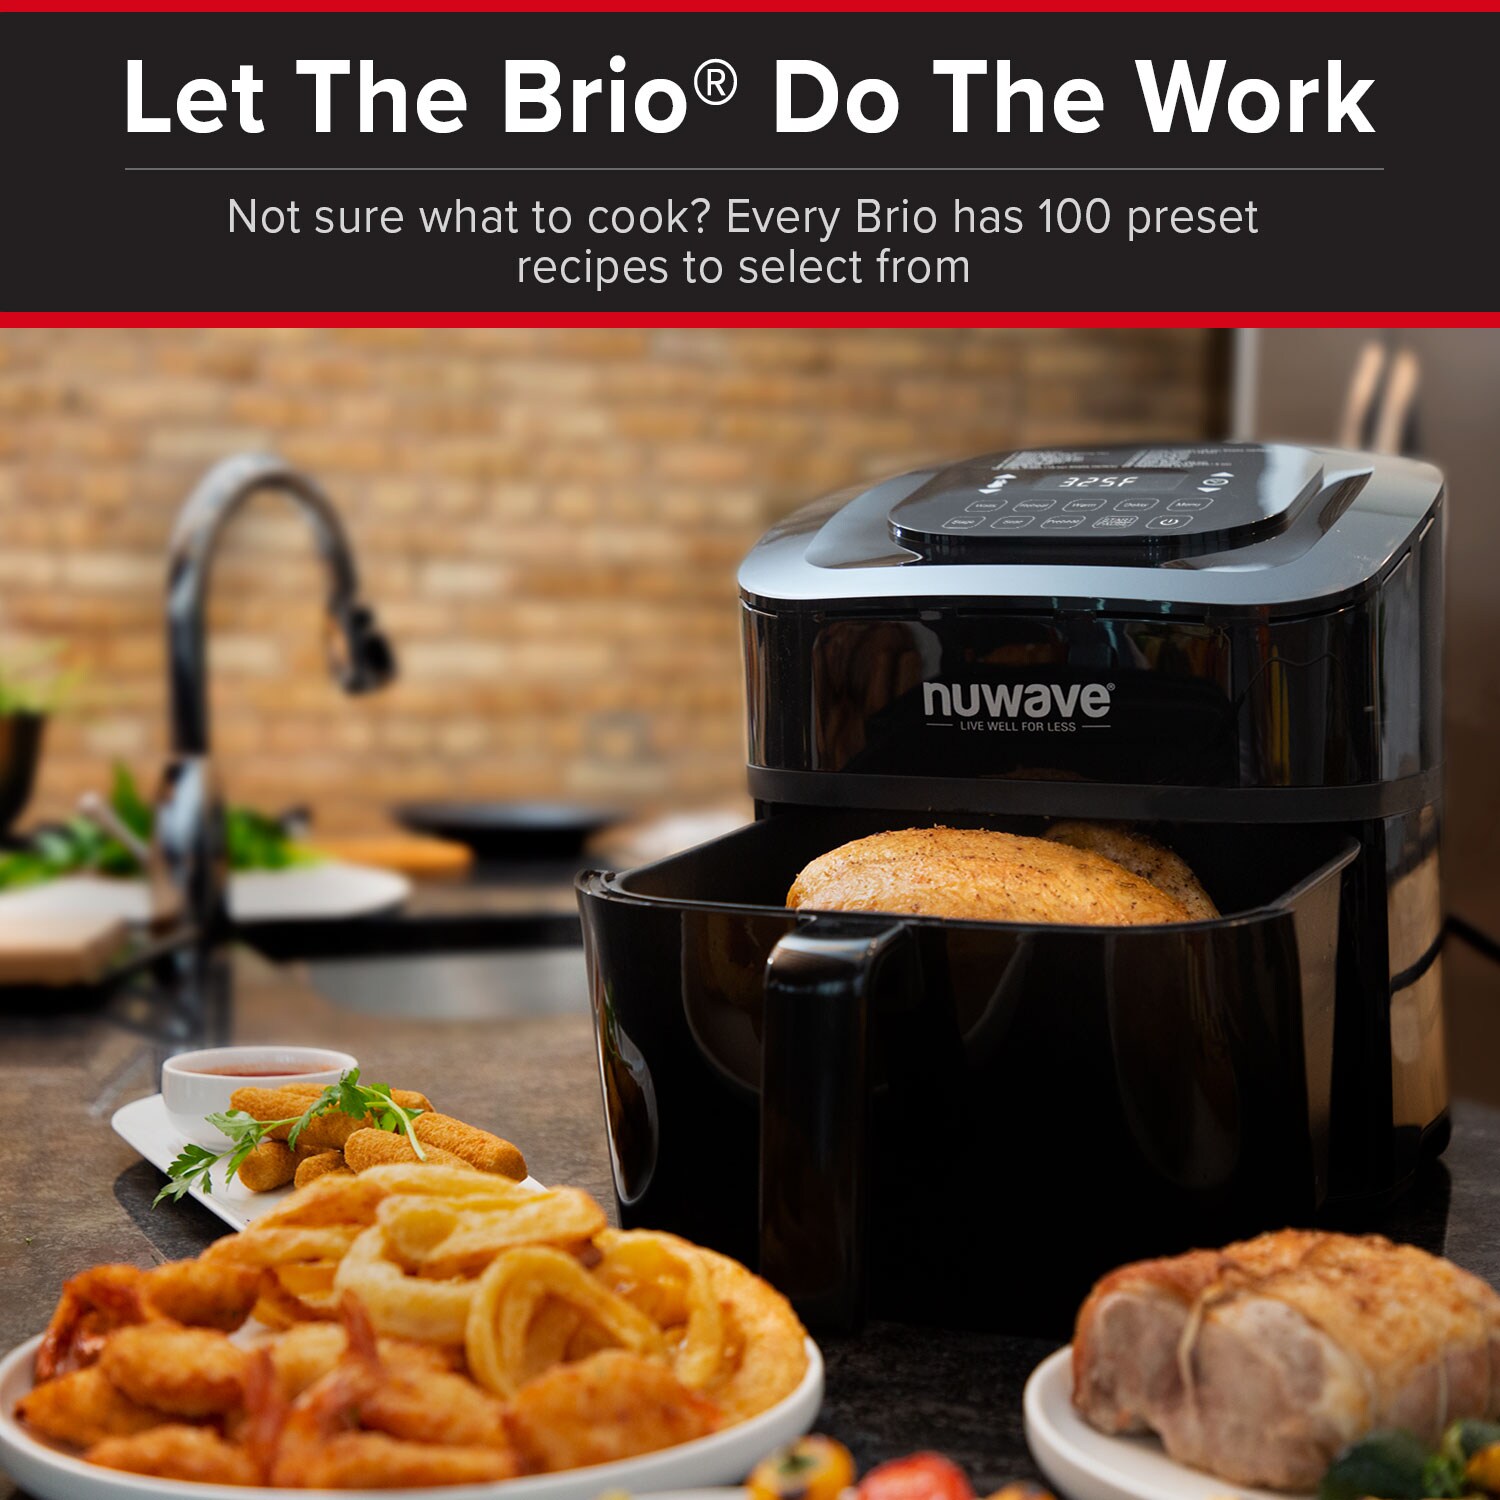 Air Fryer 3.2 qt Non-stick,Little-To-No-Oil,Frying,Baking,Grilling 900g/2lb USED 